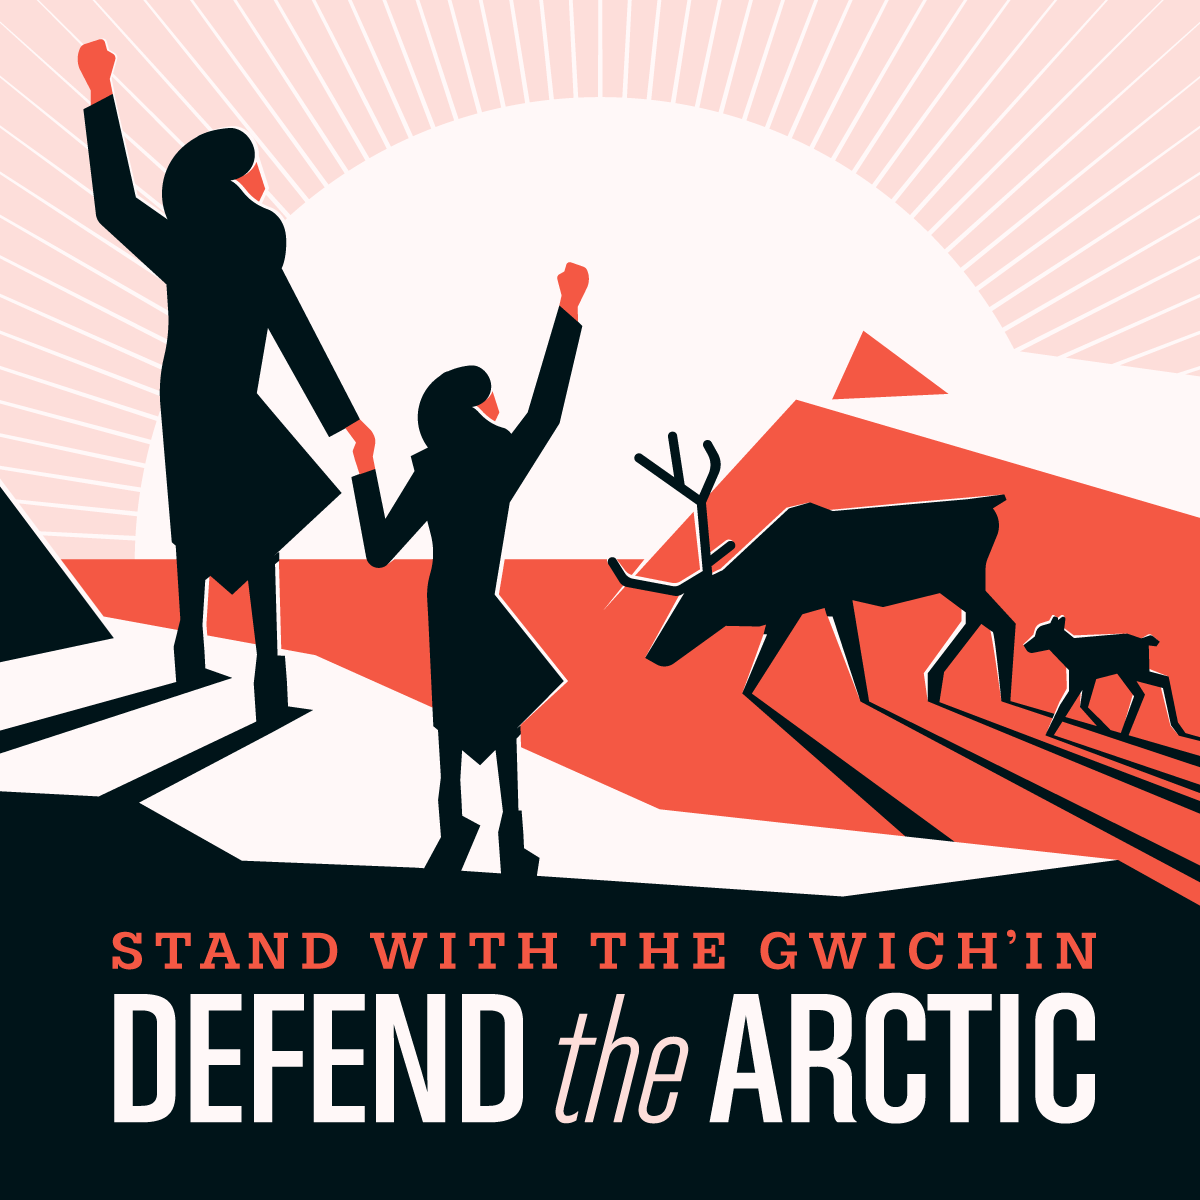 'We urge @BankofAmerica to consider the rights, wellbeing and free, prior and informed consent of Indigenous Peoples in all projects it finances and to avoid projects that harm Indigenous Peoples or violate our rights.' @OurArcticRefuge on new BOA policy: ourarcticrefuge.org/gwichin-steeri…